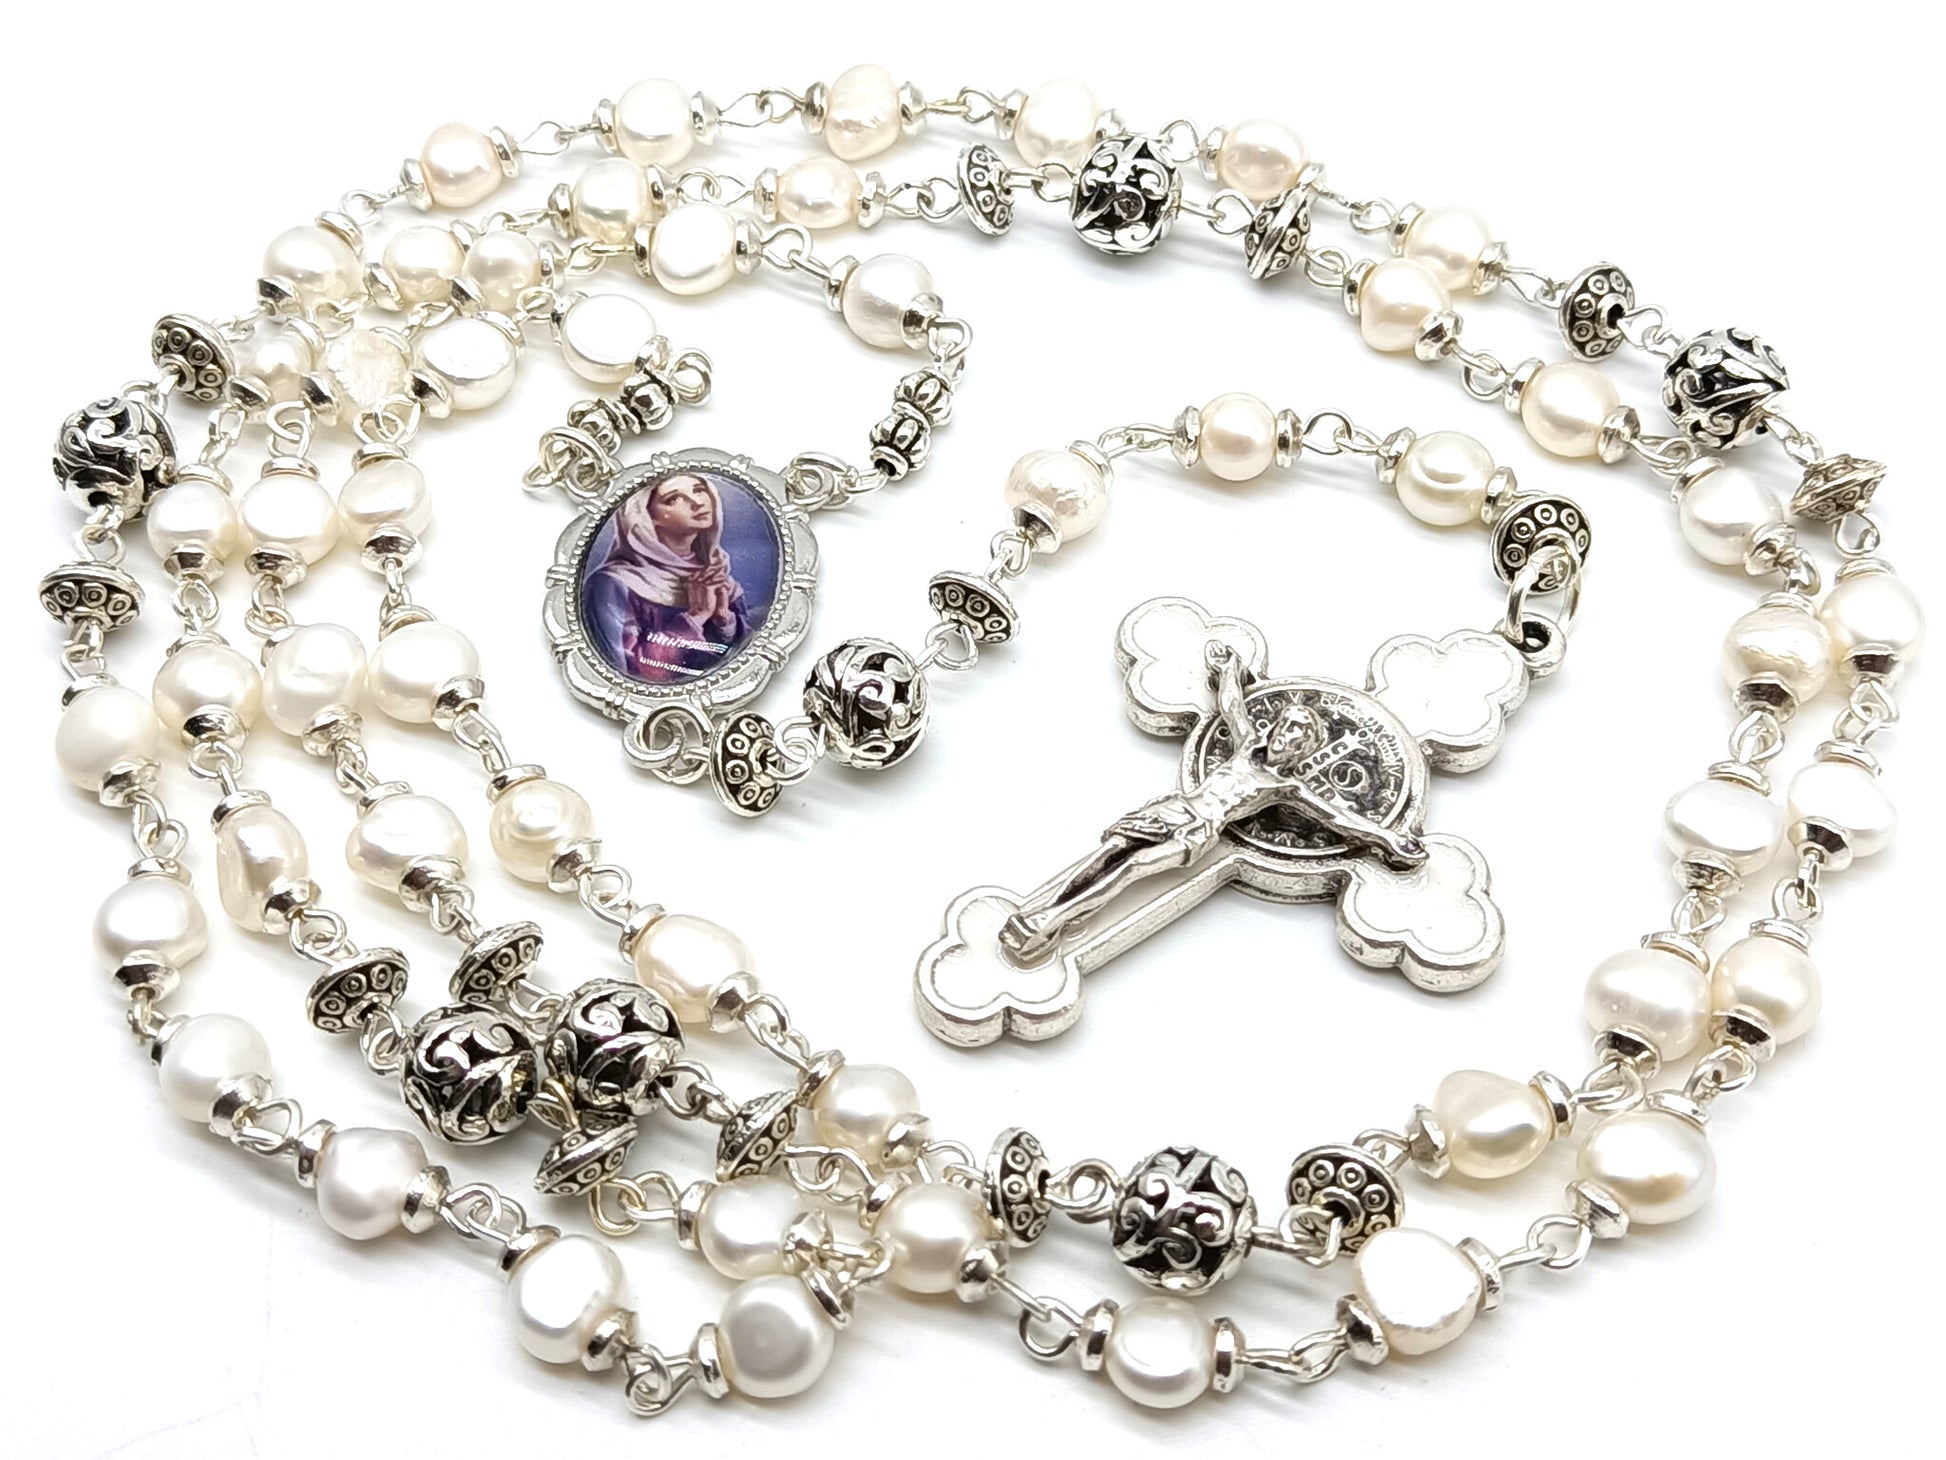 Genuine pearl unique dolor rosary with white enamel crucifix and silver Our Lady picture medal and silver dolour beads.